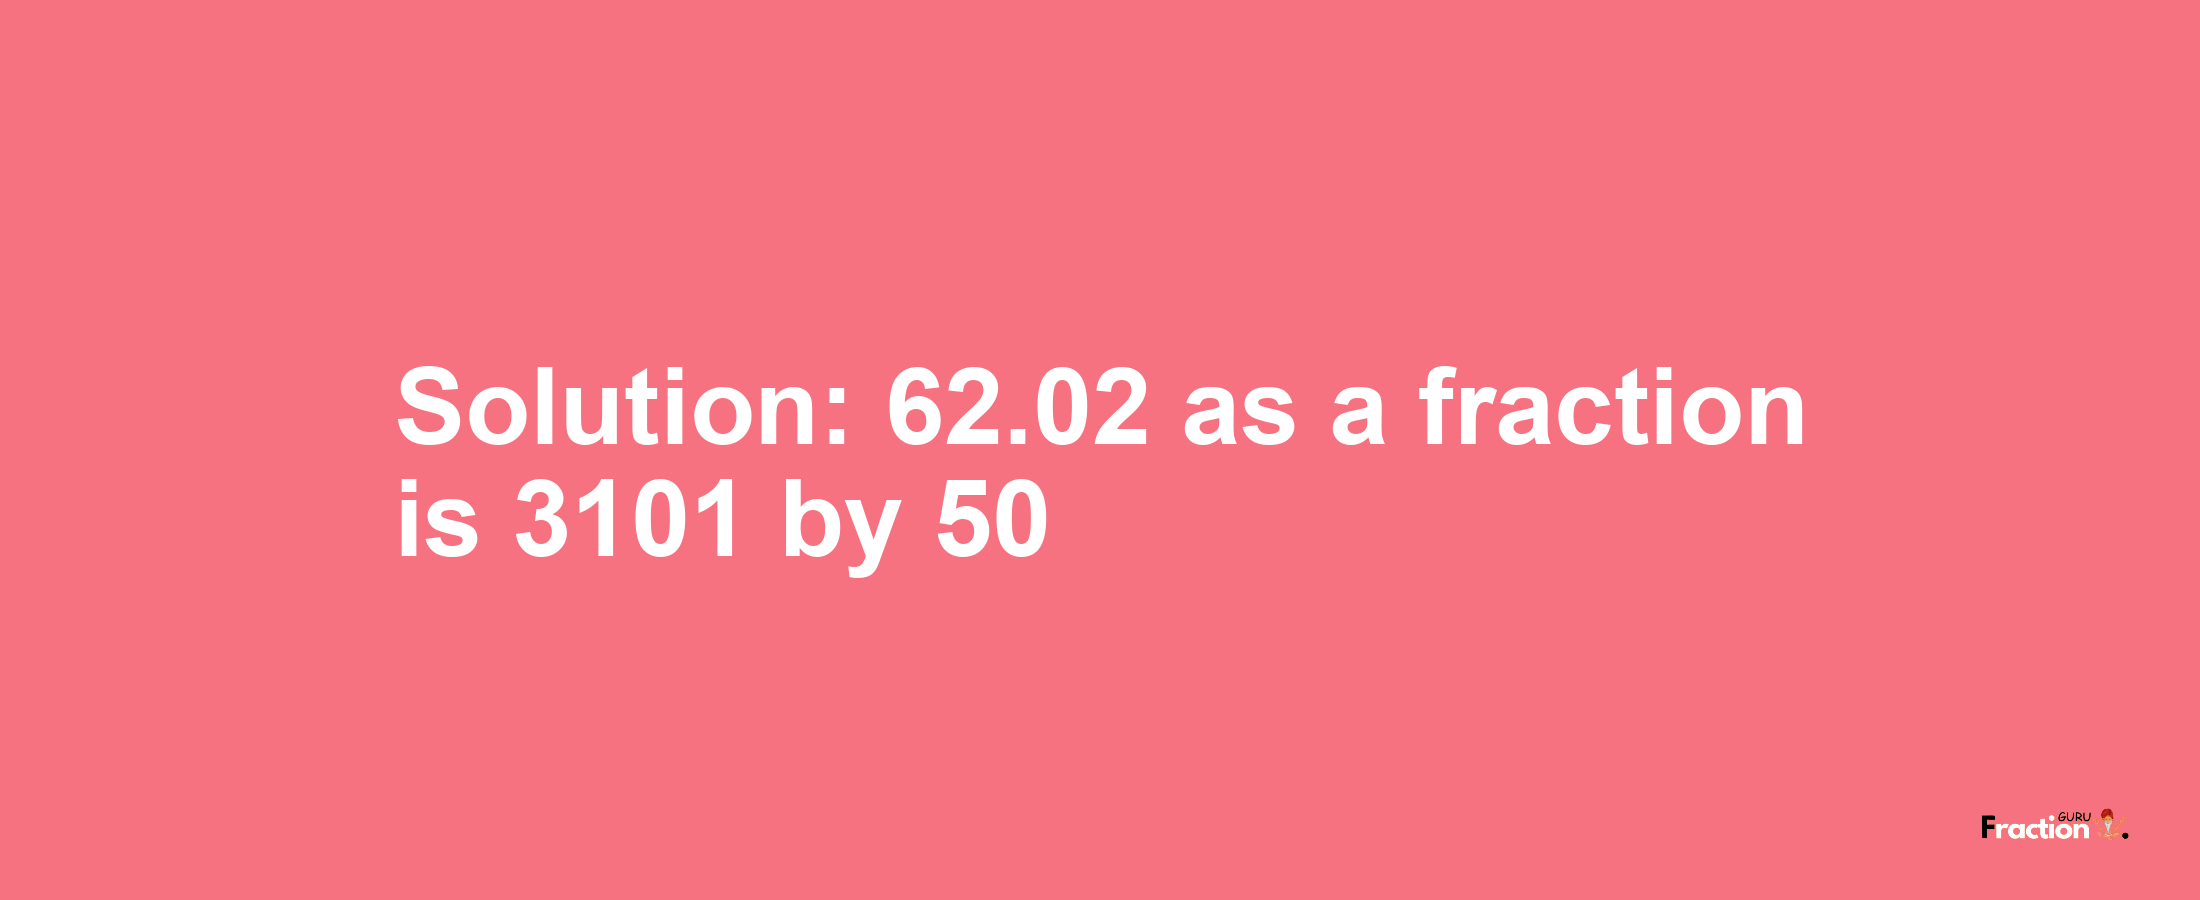 Solution:62.02 as a fraction is 3101/50